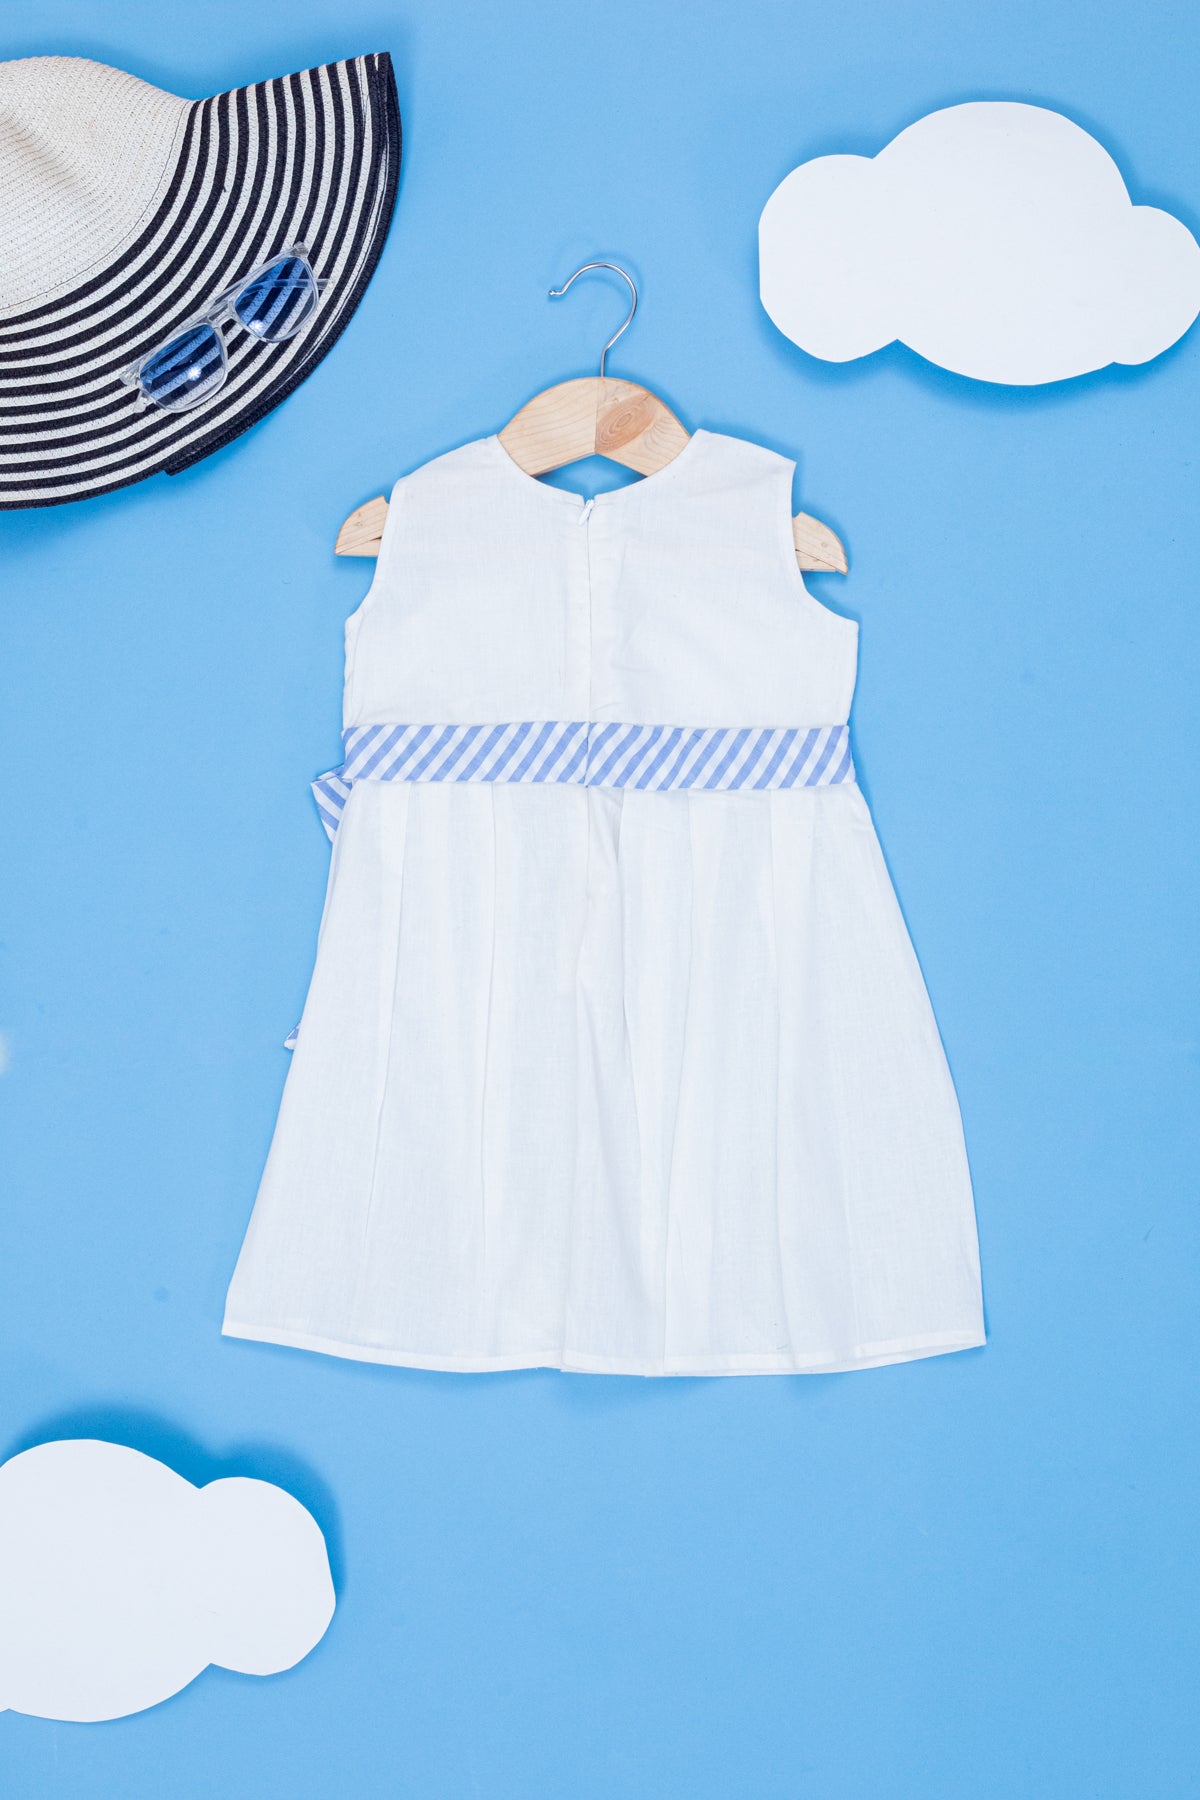 Sugar White Cotton Dress with a Belt for Kids